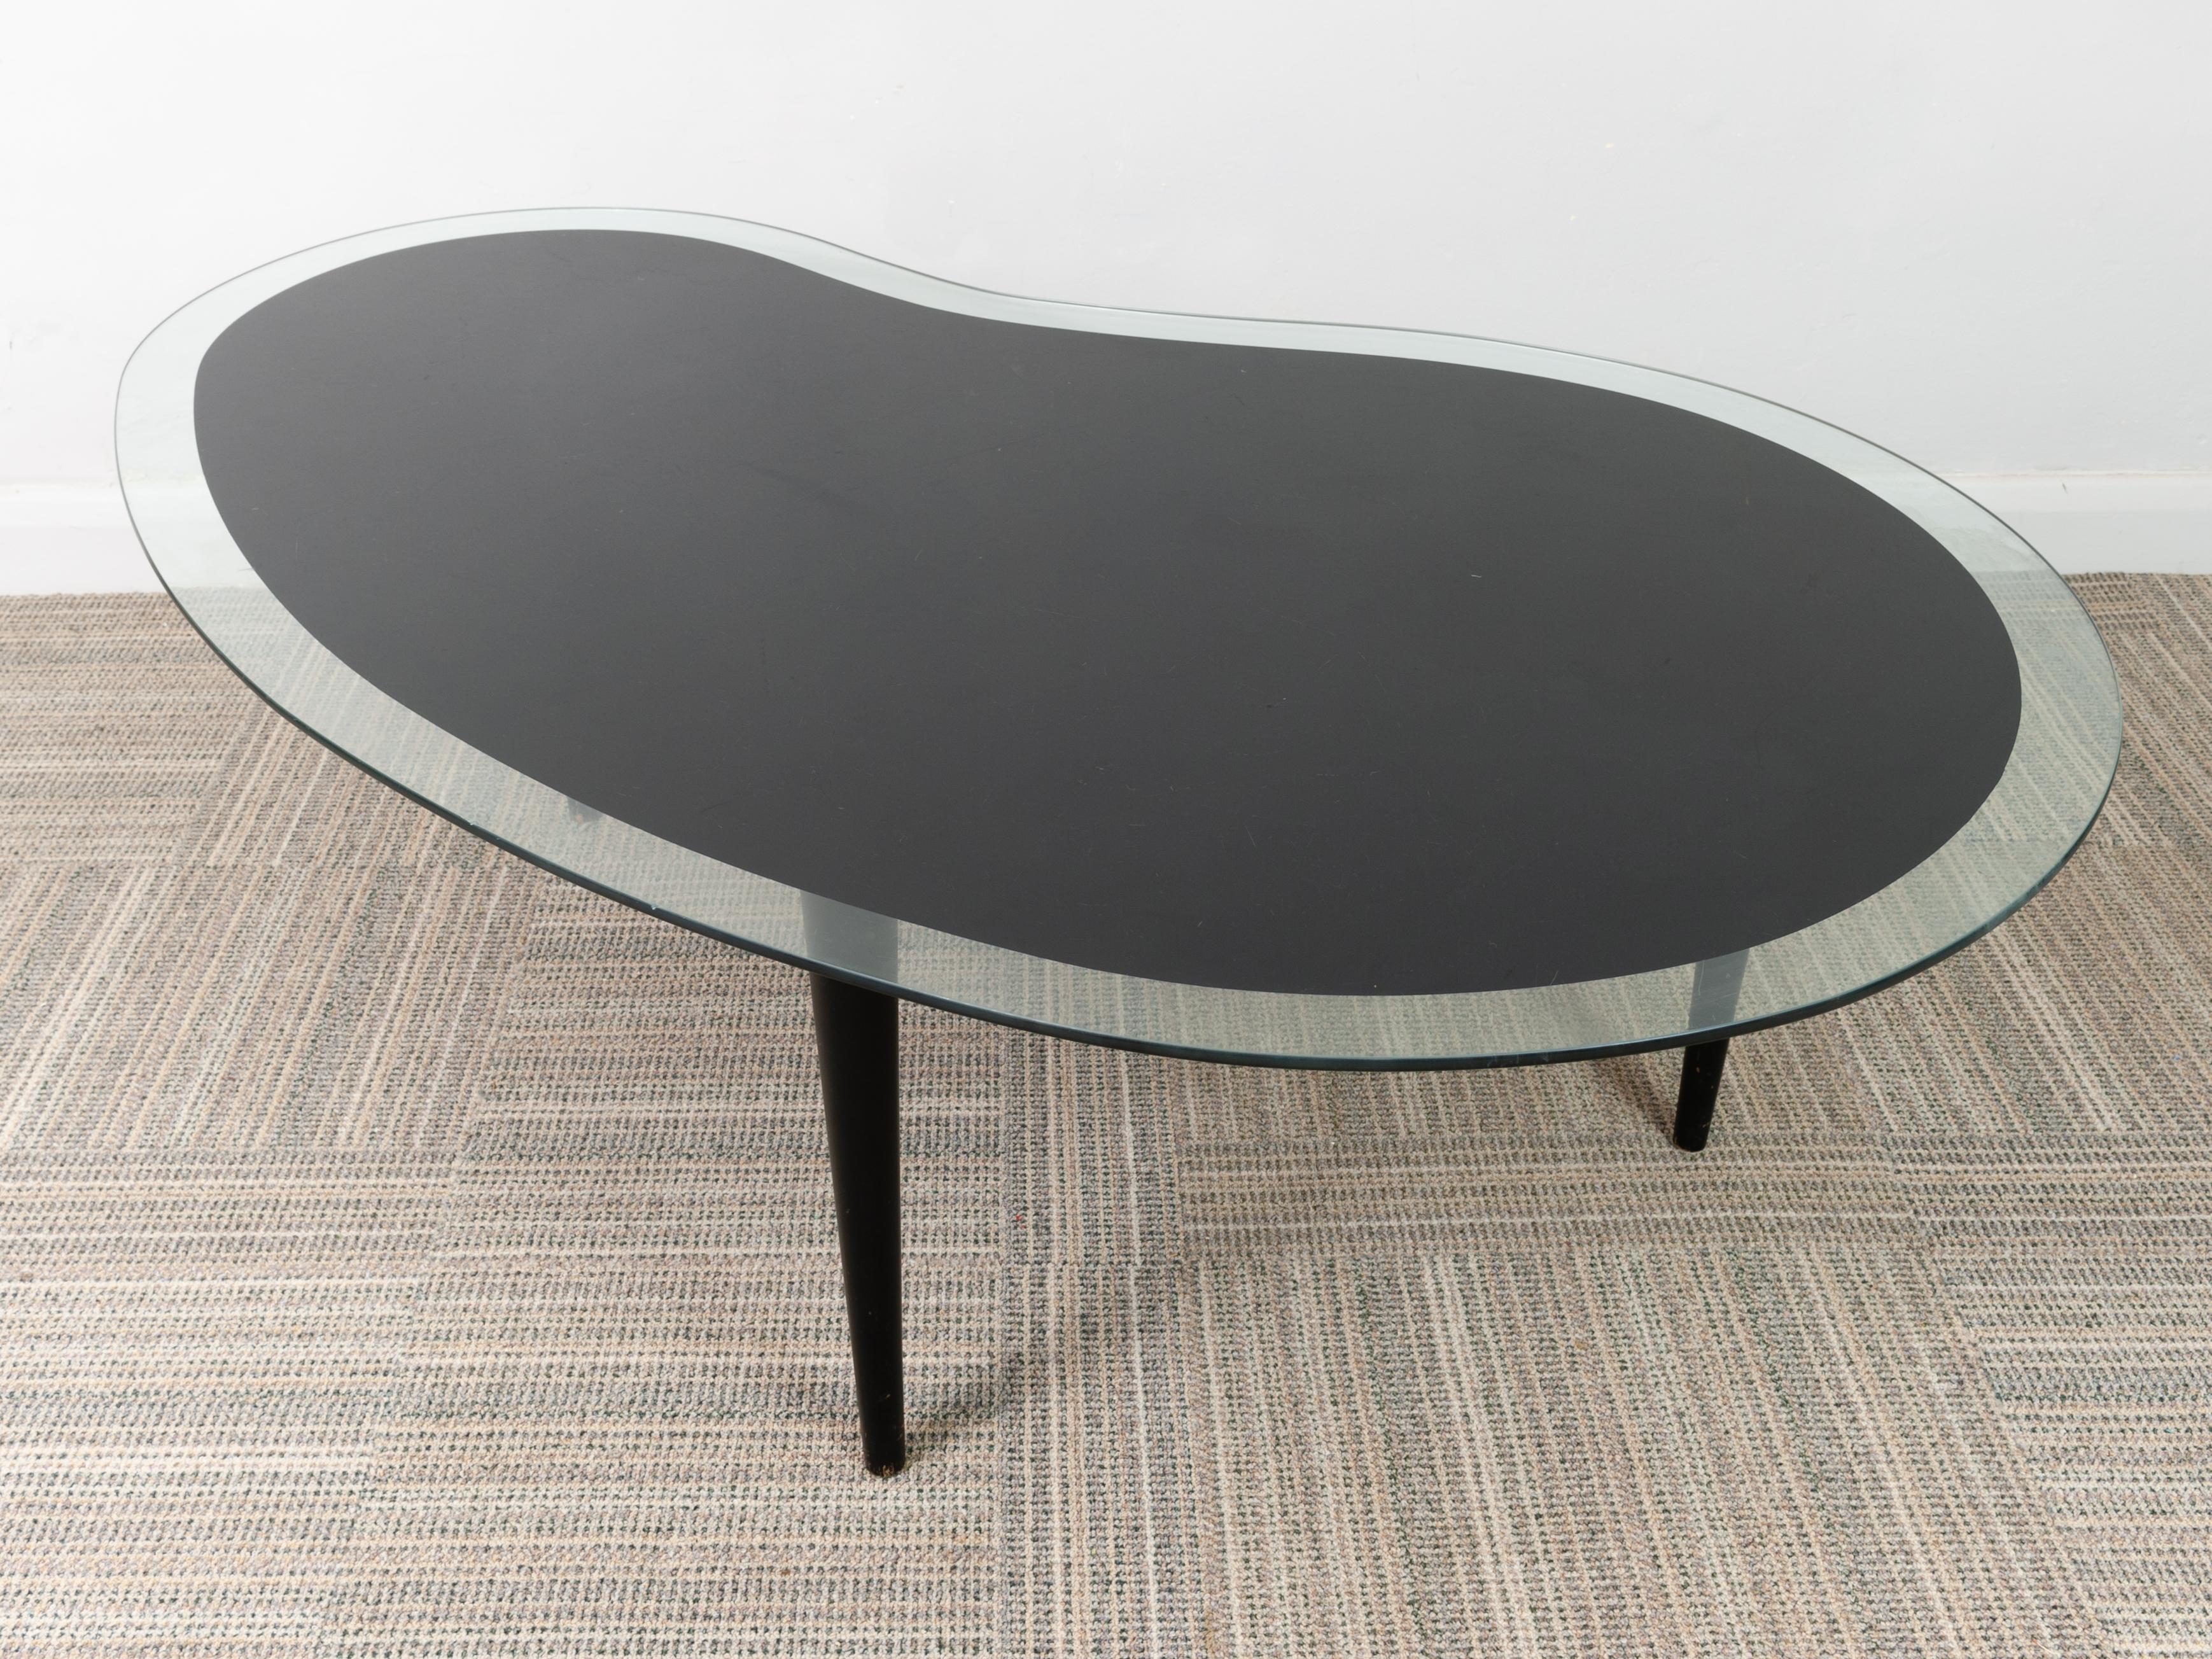 Vintage 1960s Amoeba or Kidney shaped coffee table with a black inner glass design which follows the shape of the table with a clear outside edge. The table has three removable ebonised wooded legs that unscrew for storage. There are scratches to